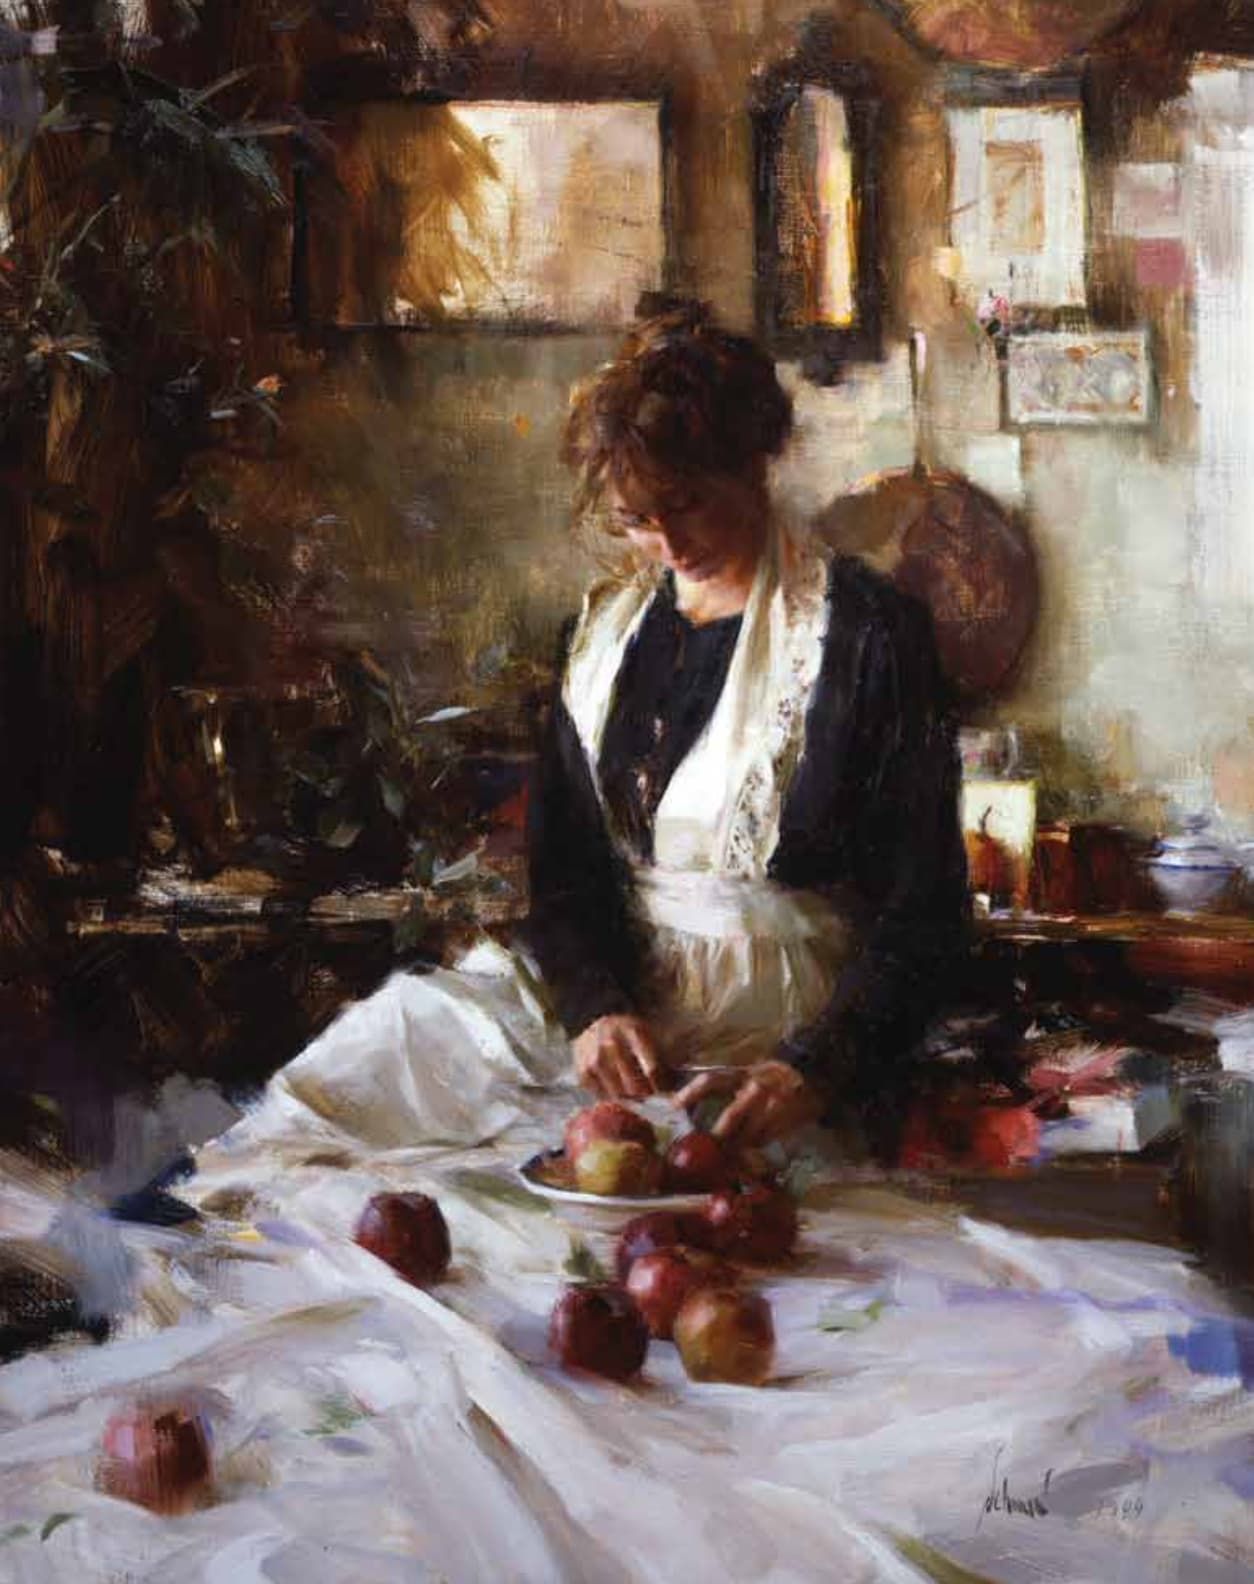 Richard Schmid's color chart exercise saved my art career